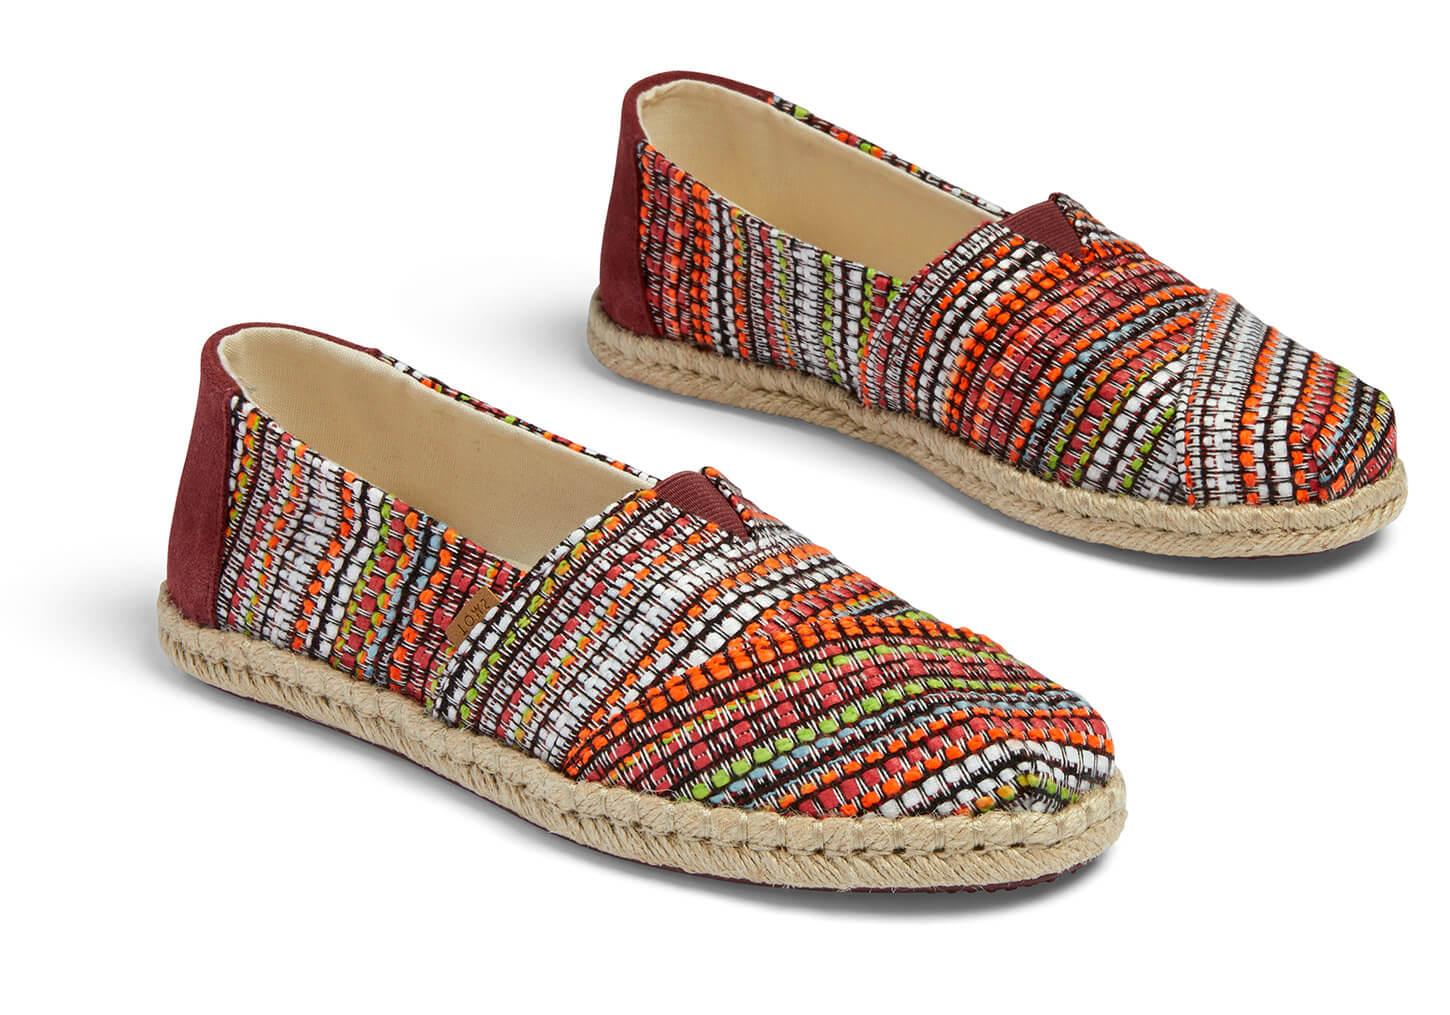 TOMS Suede Cherry Tomato Red Woven Women's Espadrilles - Lyst